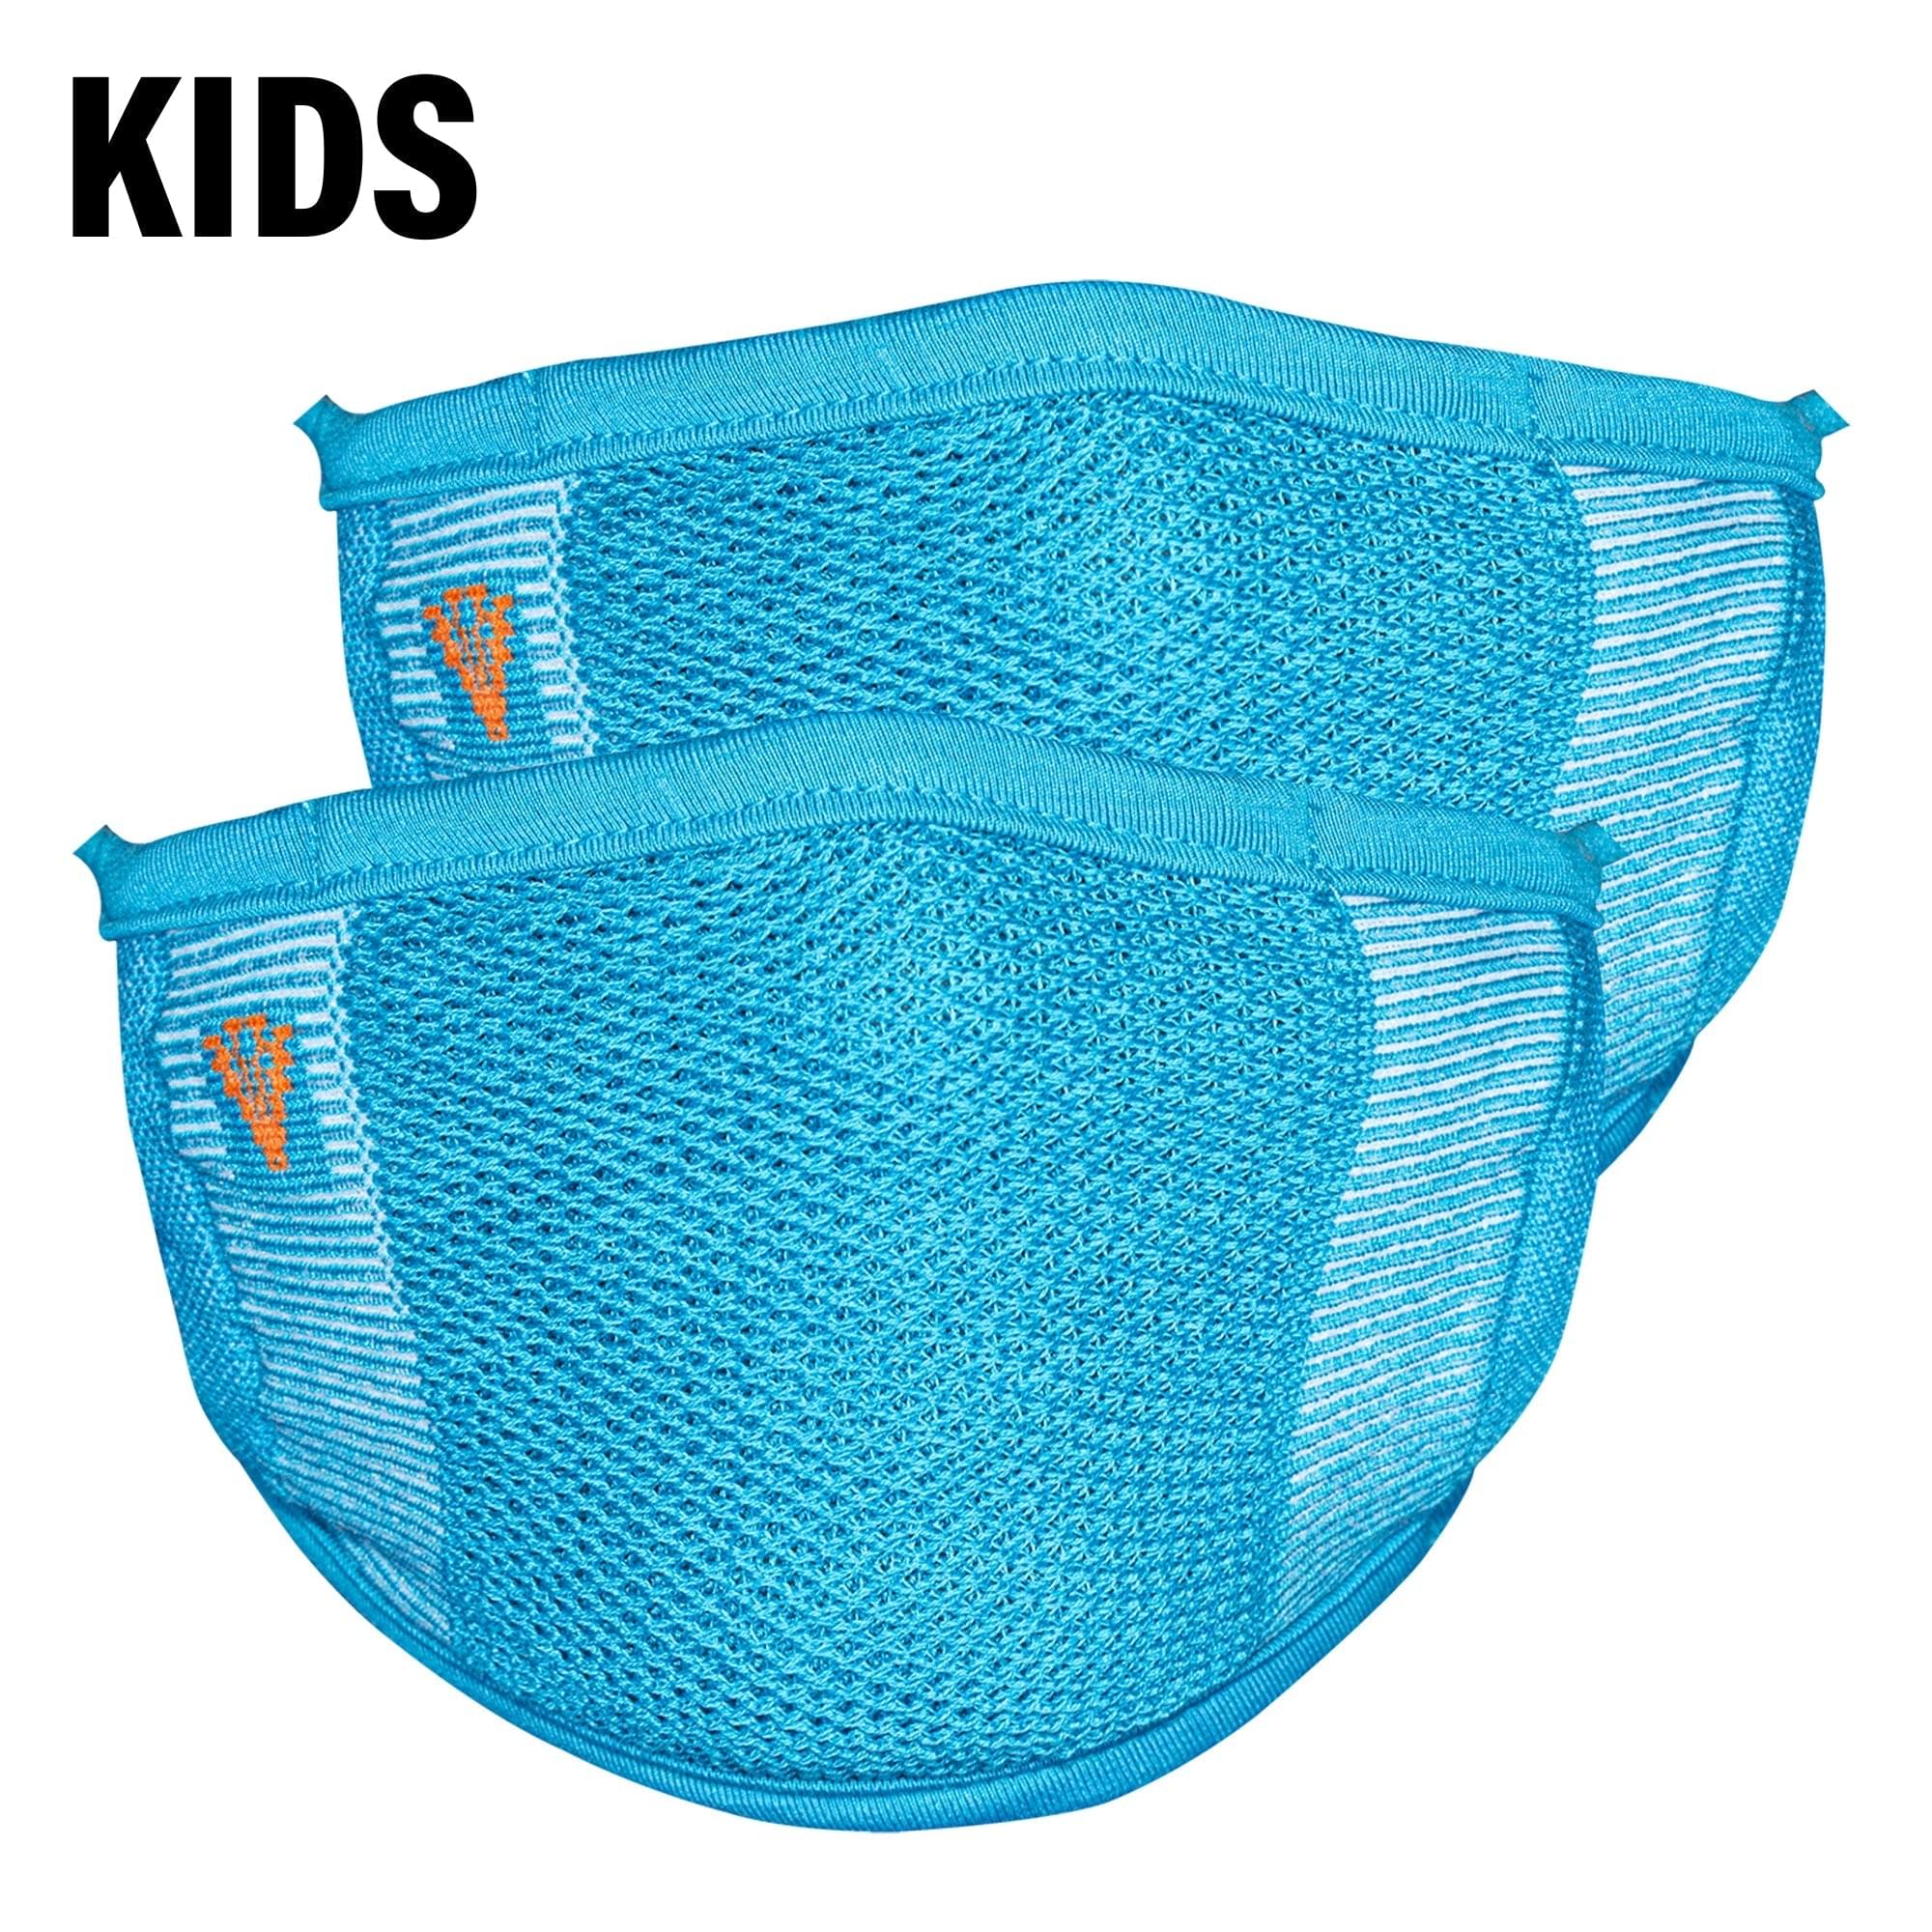 2-Layer Anti-Bacterial Protection Mask for Kids, Fashion Coloured -Size - Small (3-7 Yrs) - Pack of 2